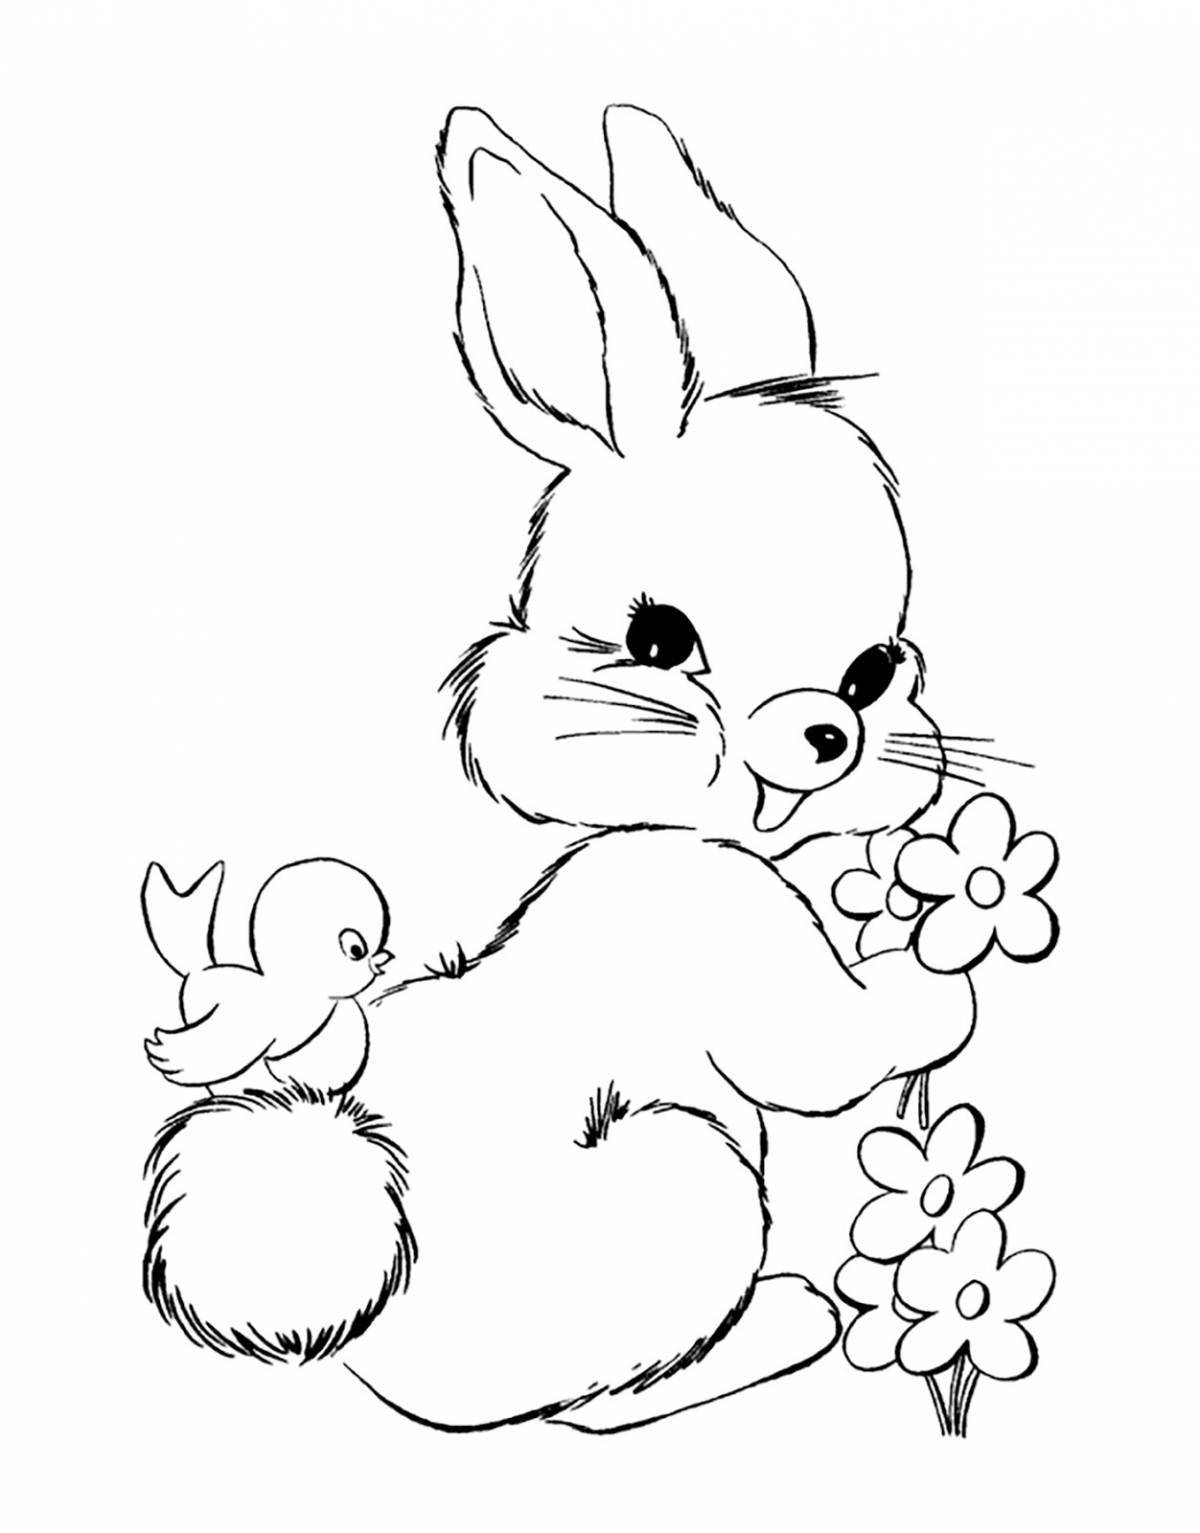 Fancy coloring drawing of a rabbit